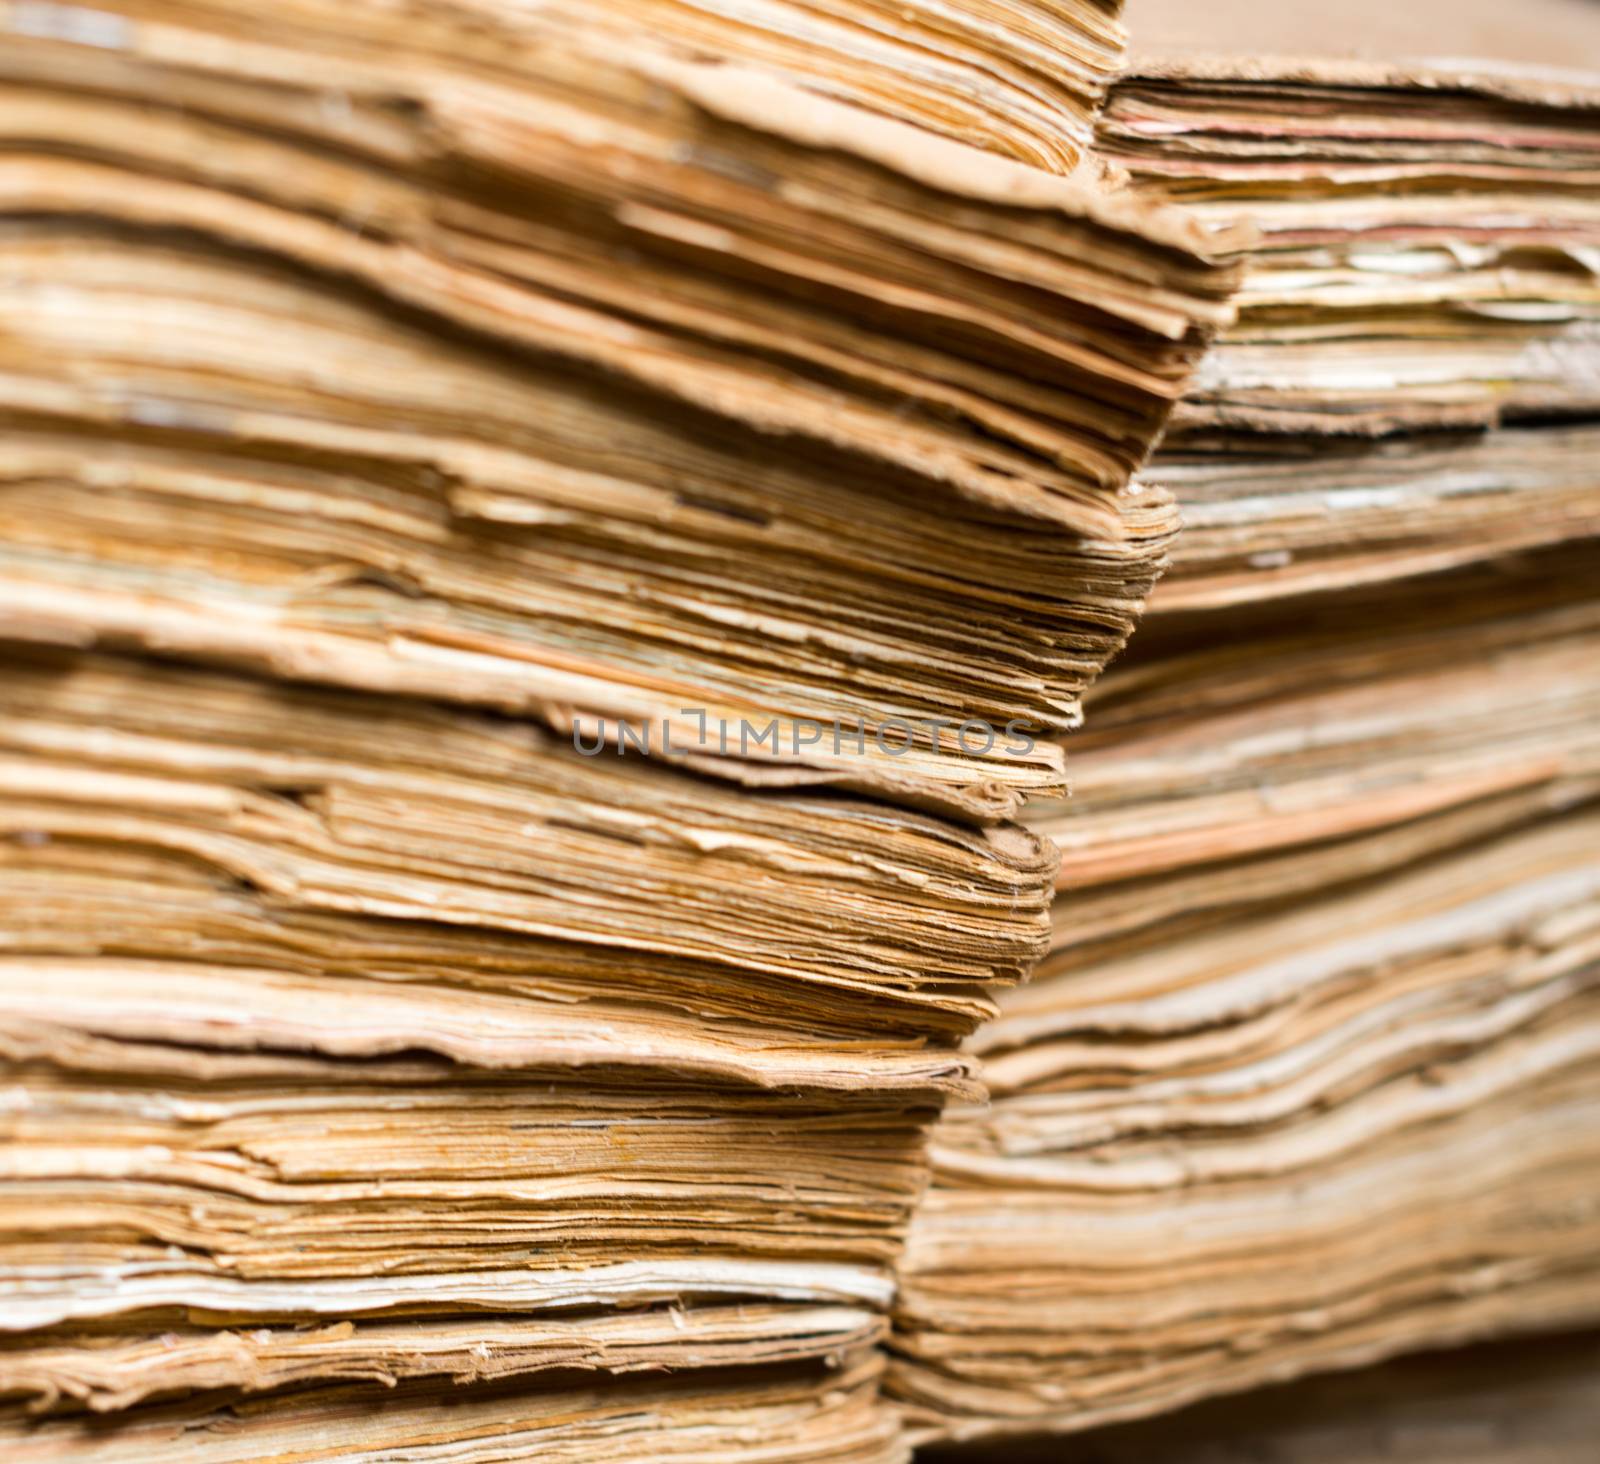 Stack of the old paper documents in the archive.